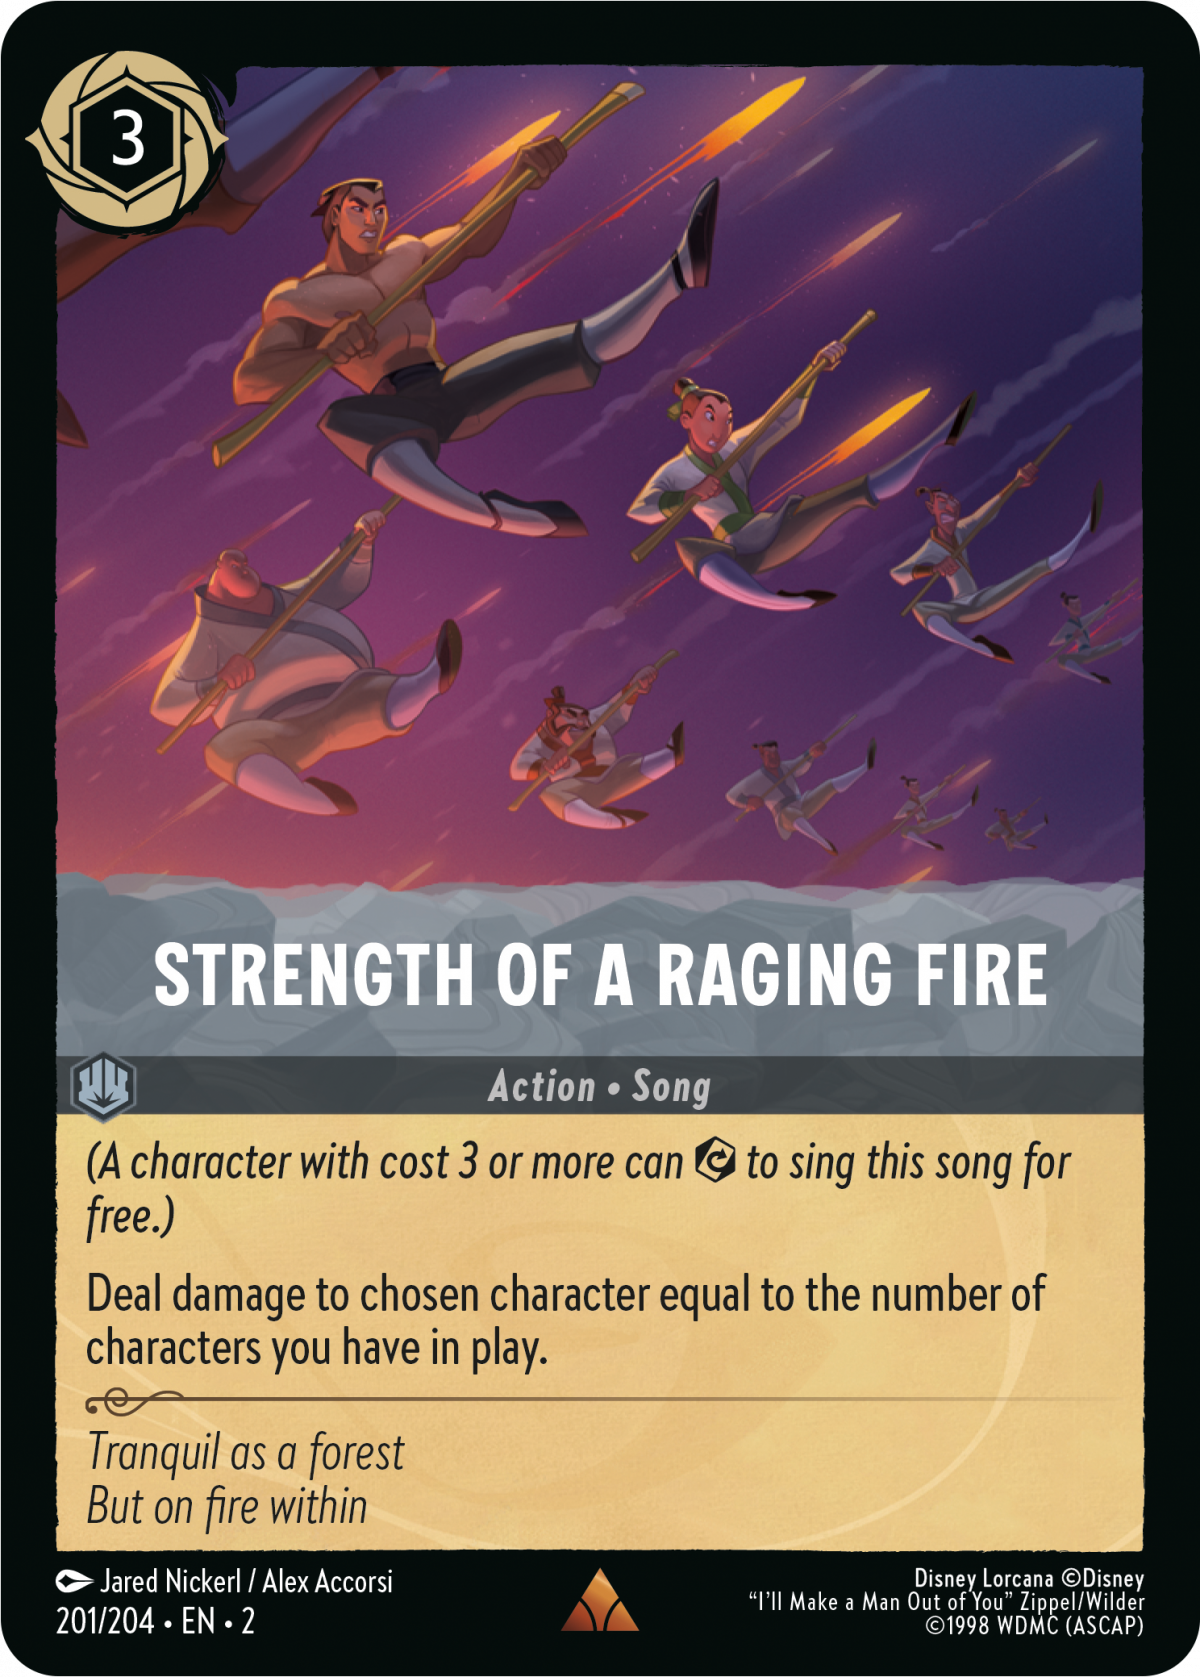 Disney Lorcana: Rise of the Floodborn song card in Steel ink with Li Shang training in Strength of a Raging Fire